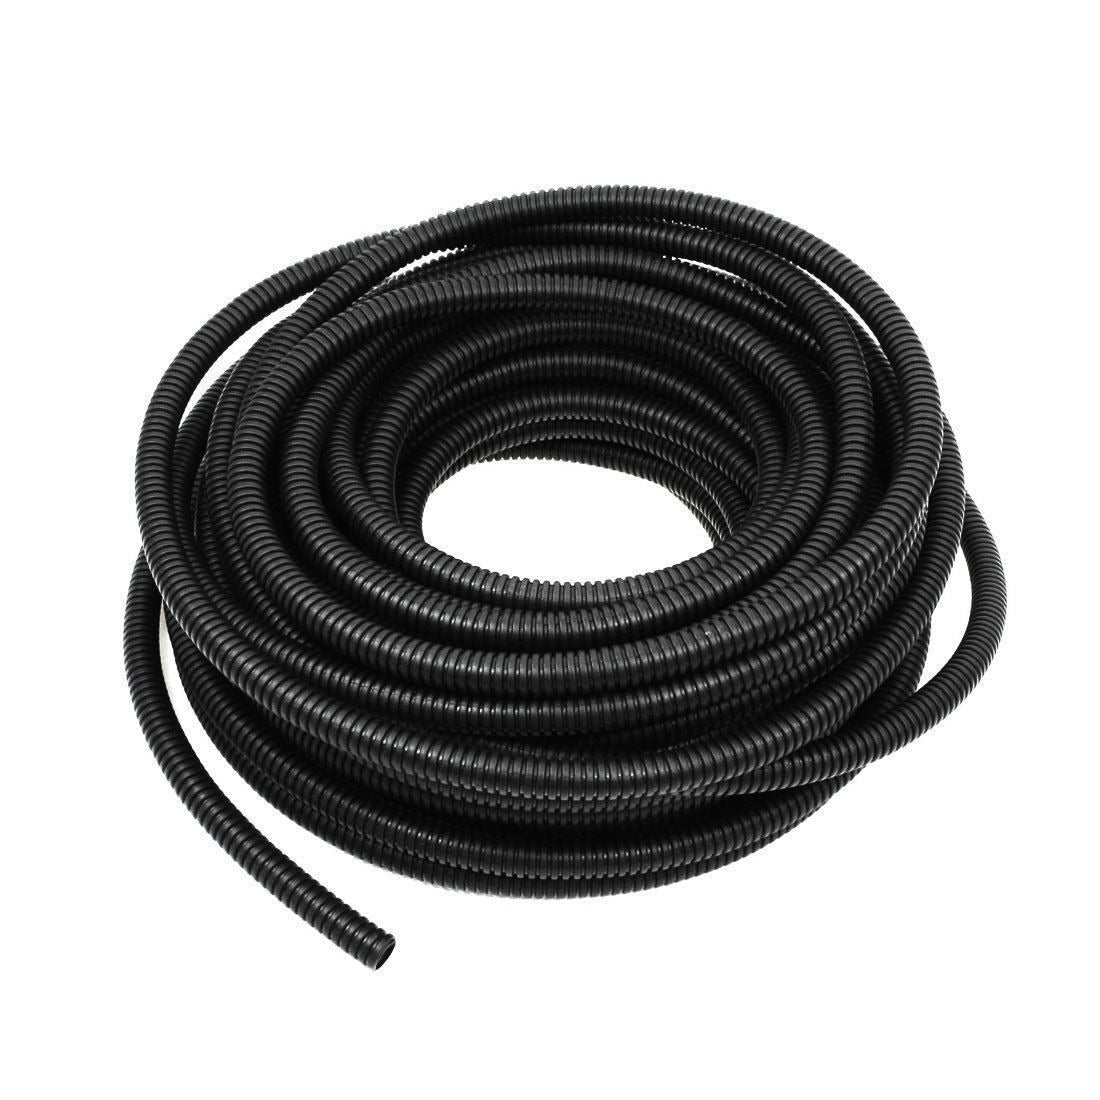 2 American Terminal SL18 High Quality 100' Feet 1/8' Split Loom Wire Tubing Black for Various Automotive, Home, Marine, Industrial Wiring Applications, Etc.